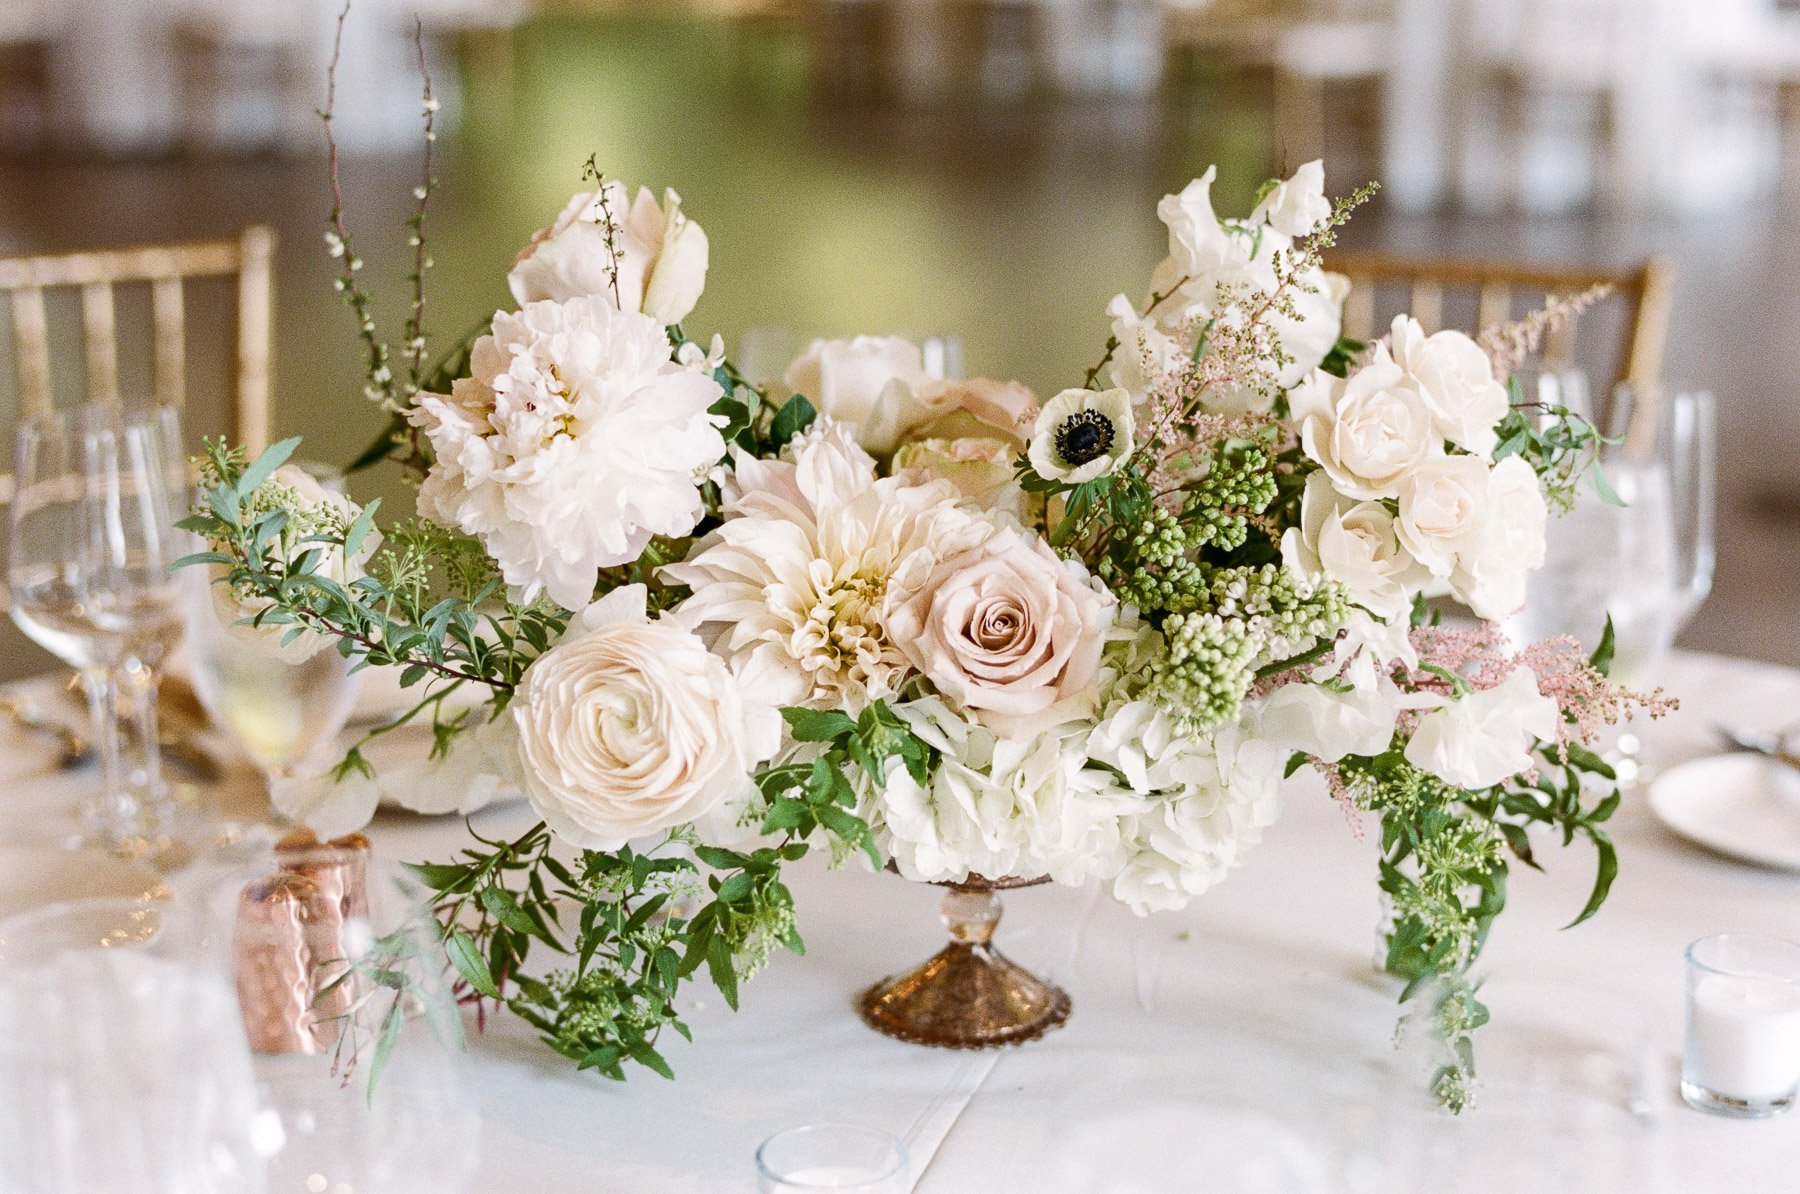 Blush pink, white and green centerpiece by Twisted Willow flowers